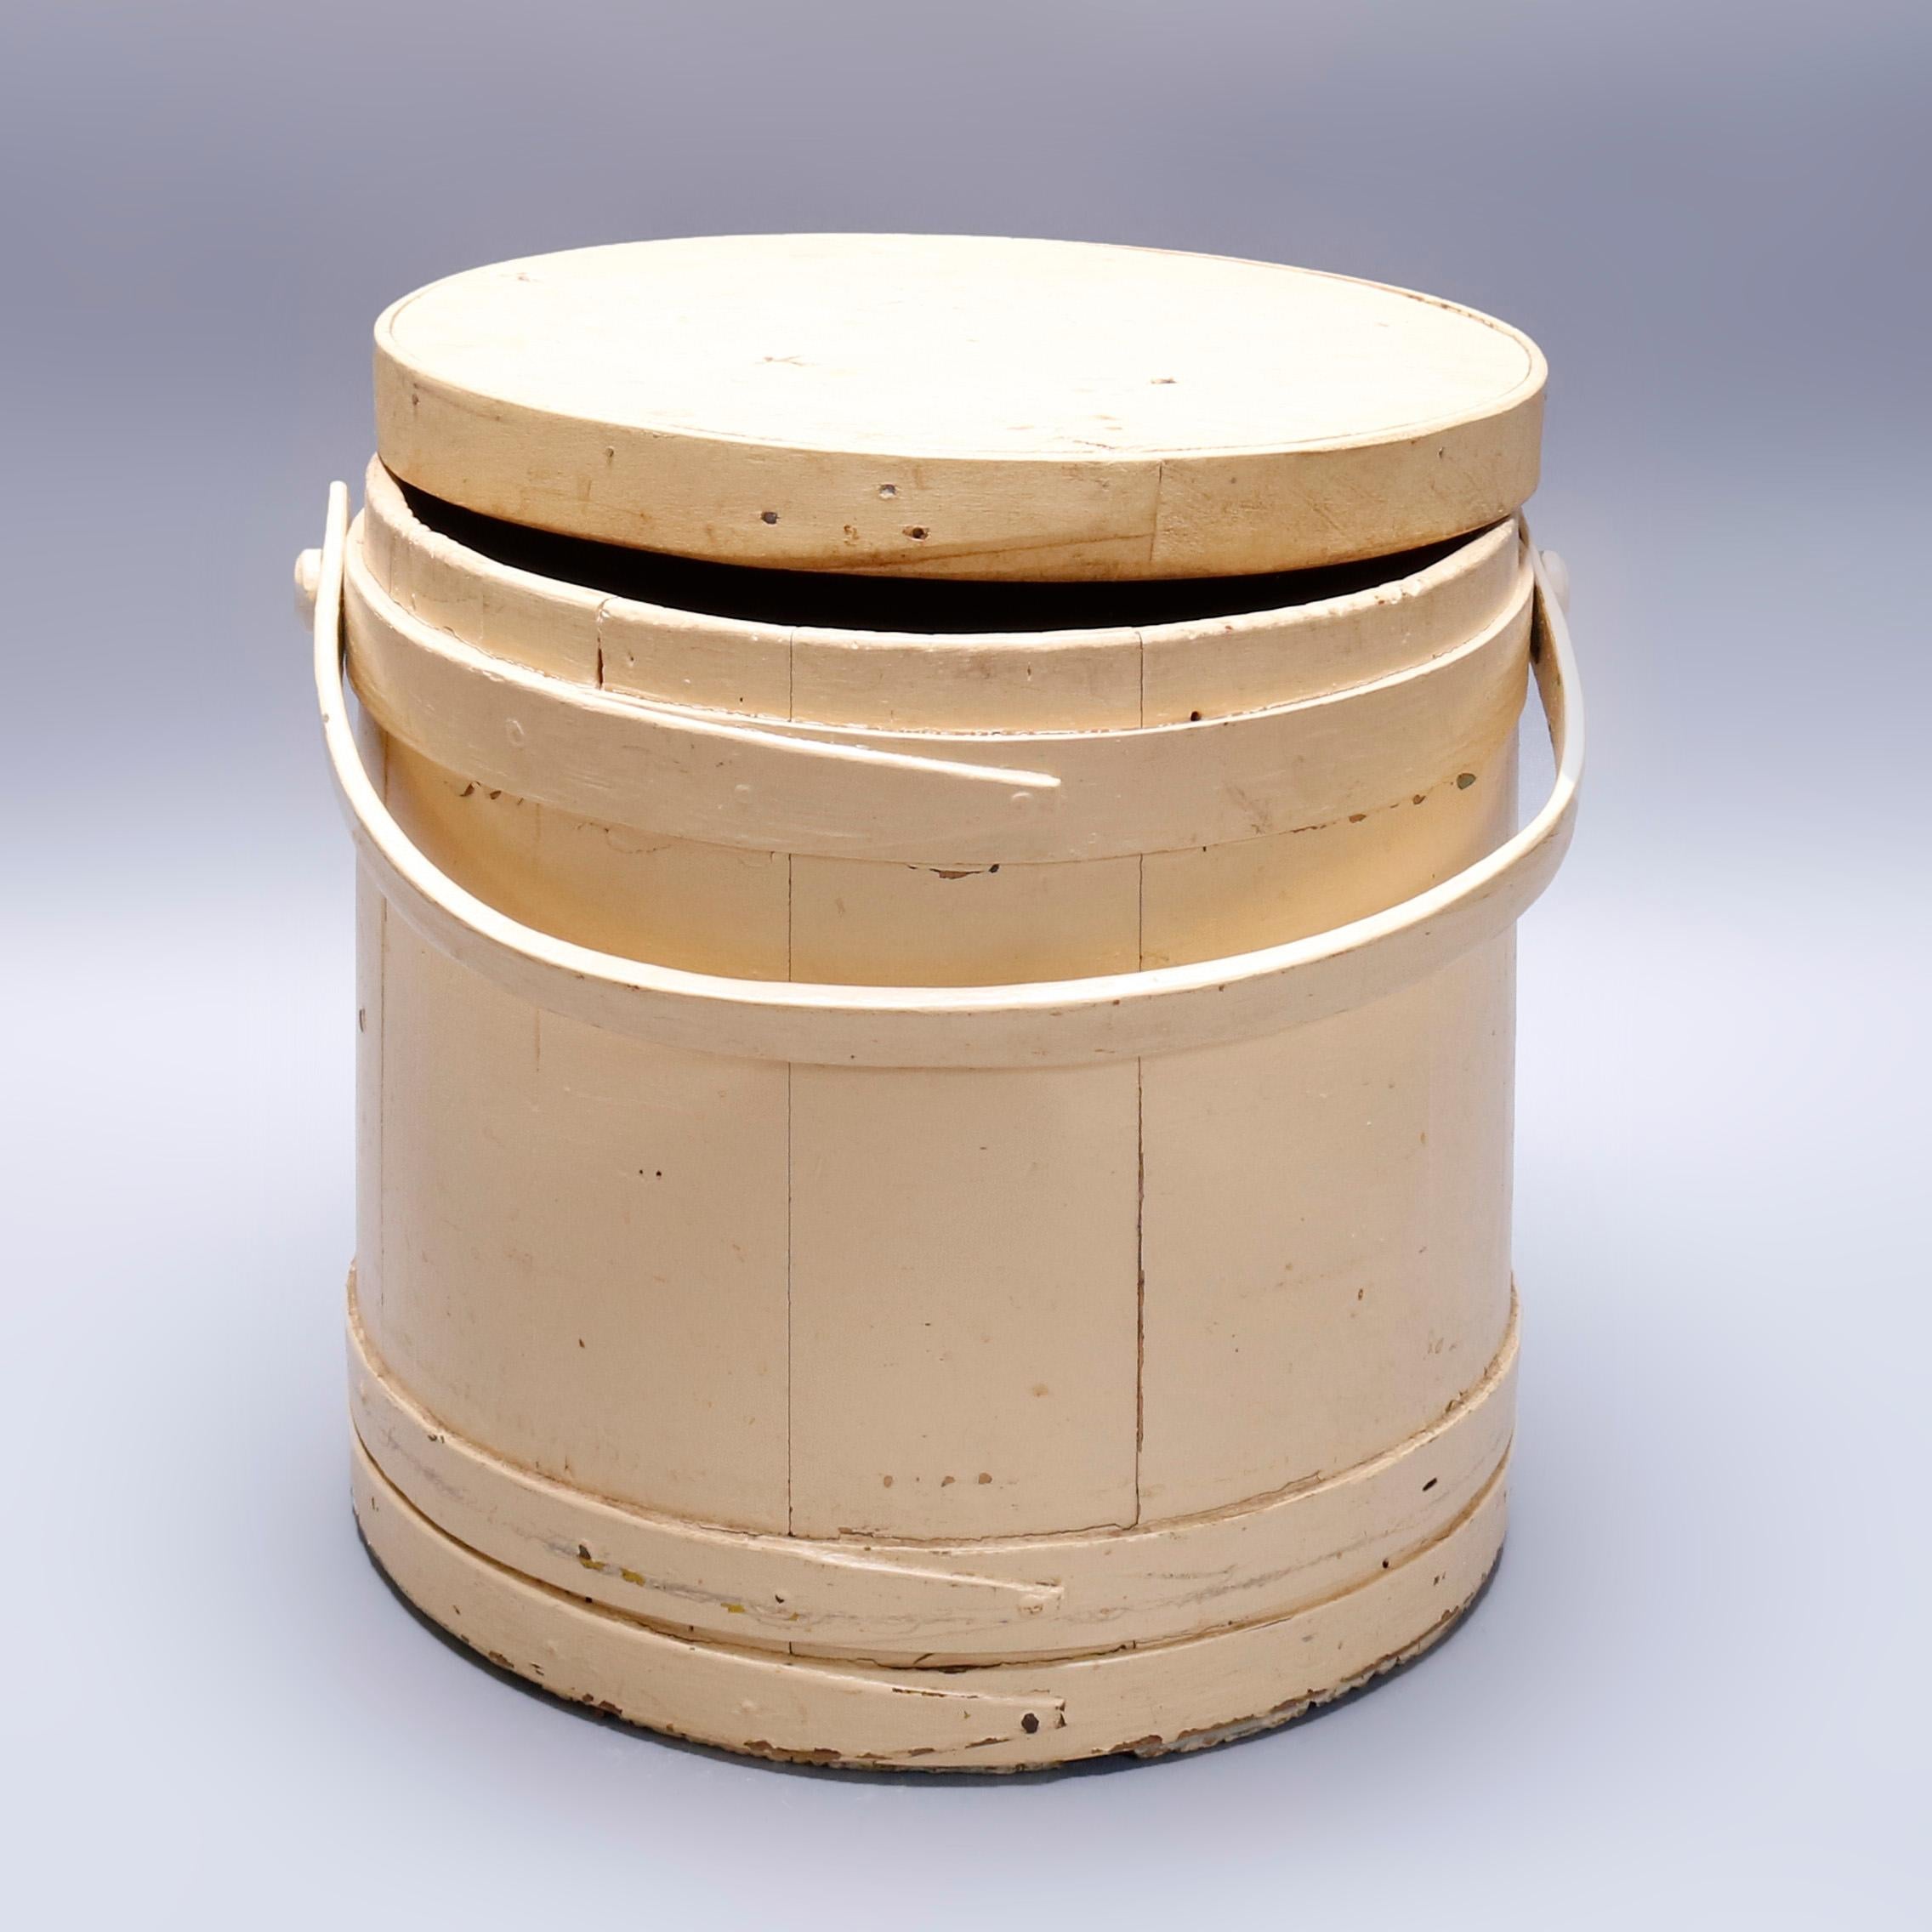 Hand-Crafted Primitive Americana Shaker Handcrafted Four-Finger Lidded Firkin Bucket